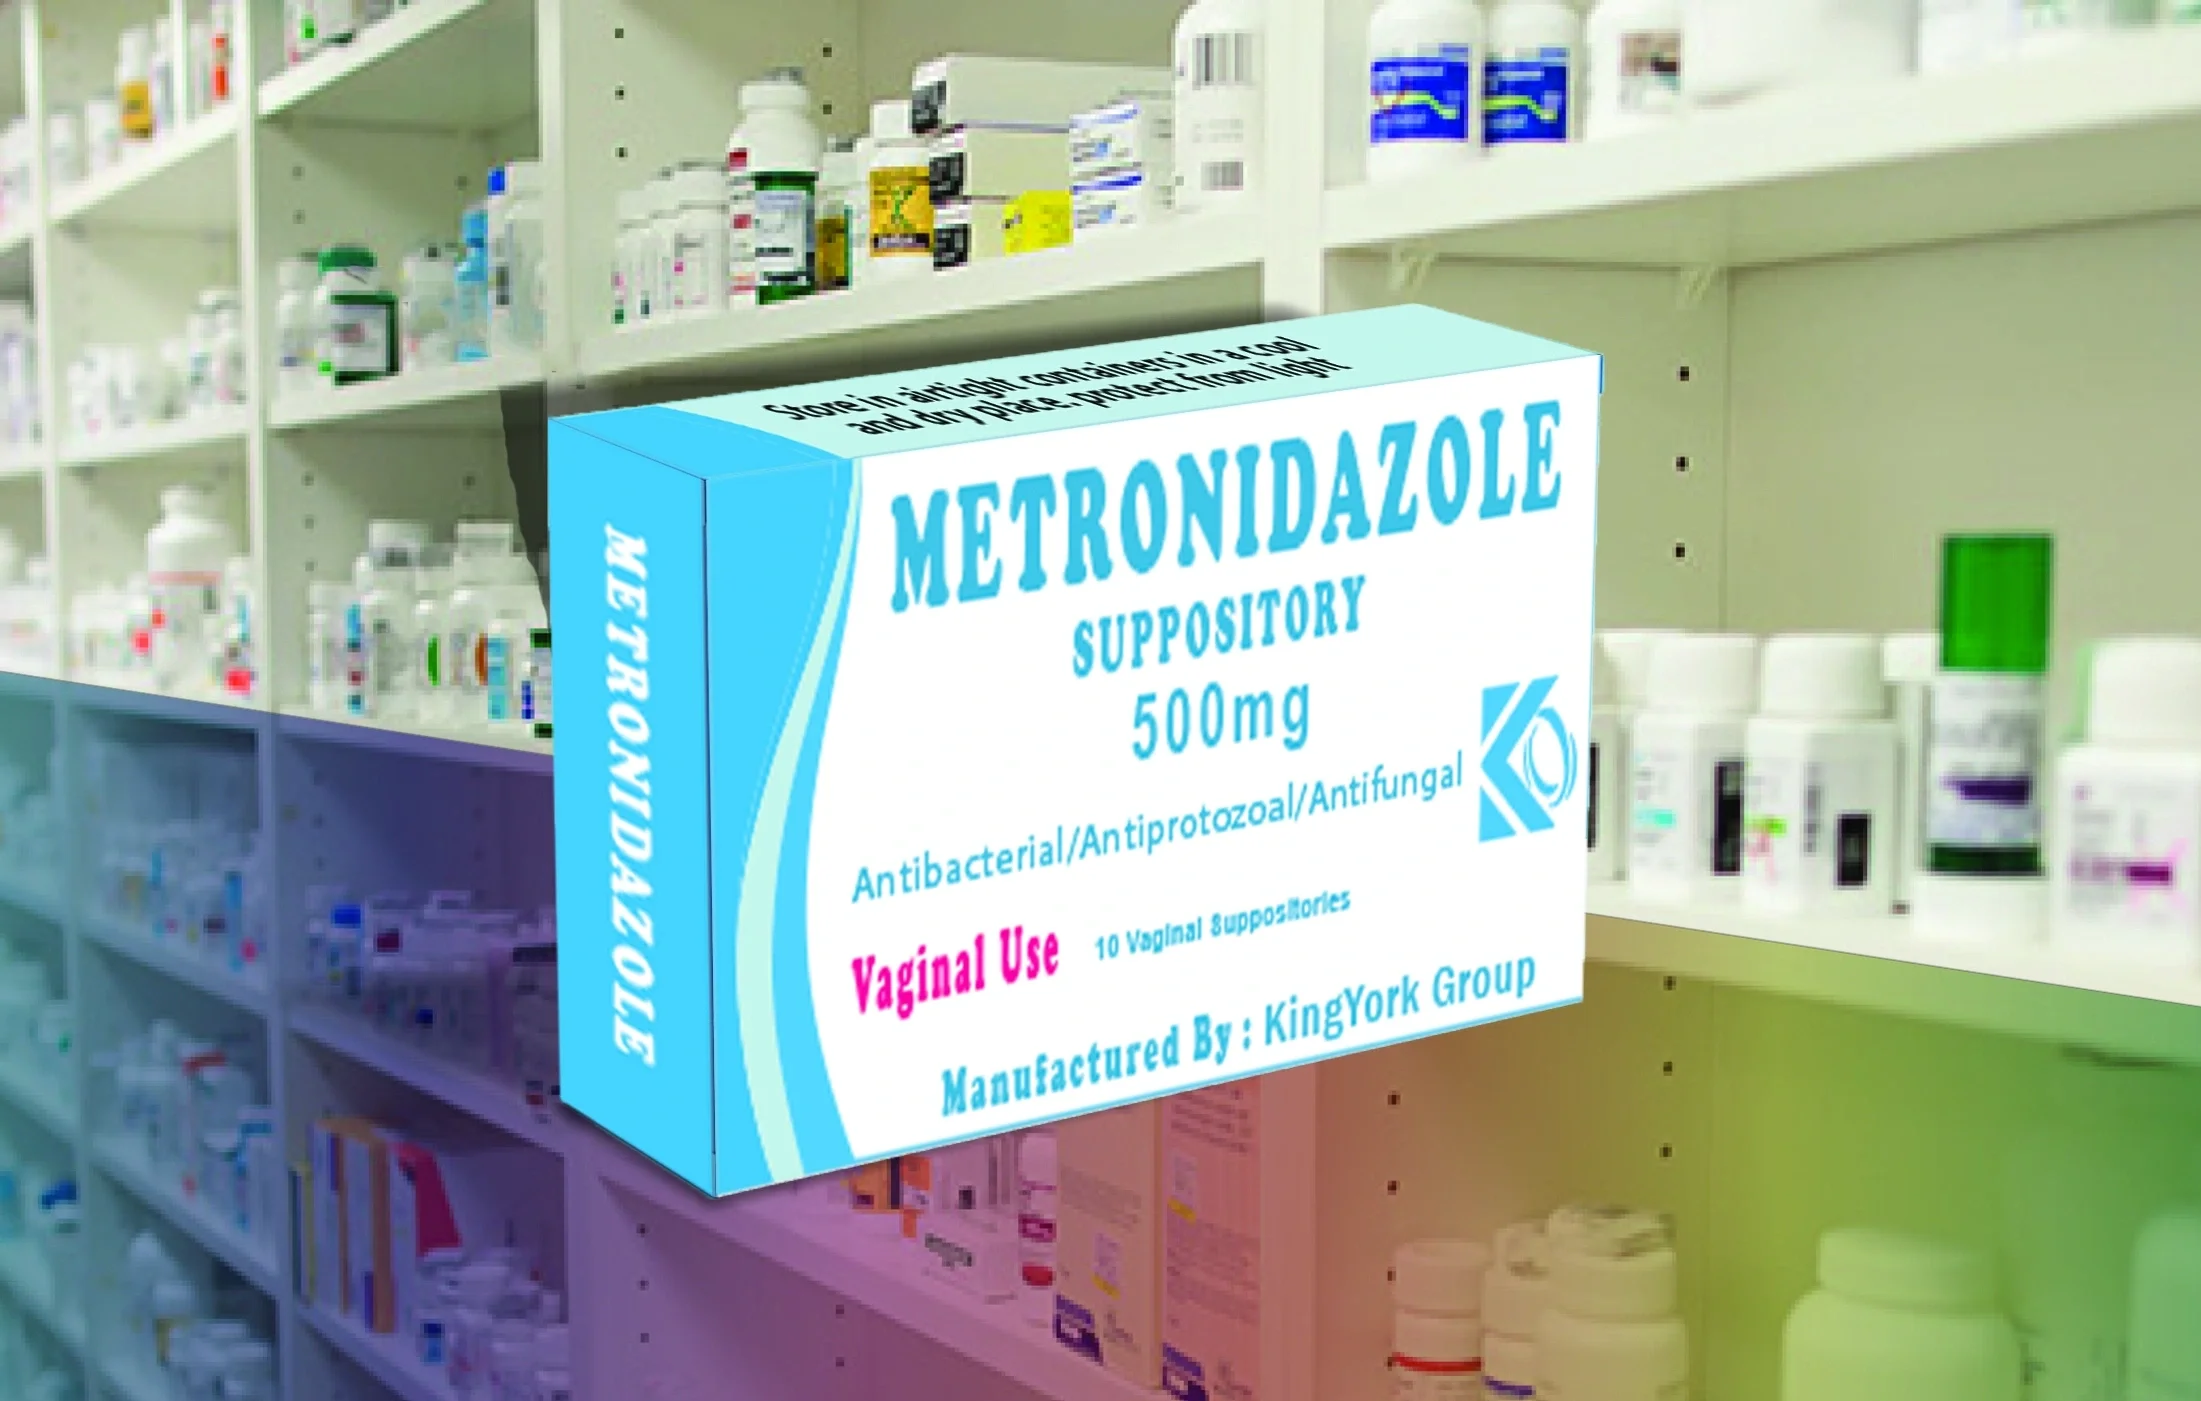 'metronidazole suppository', 'analgesic suppository', 'diclofenac suppository'